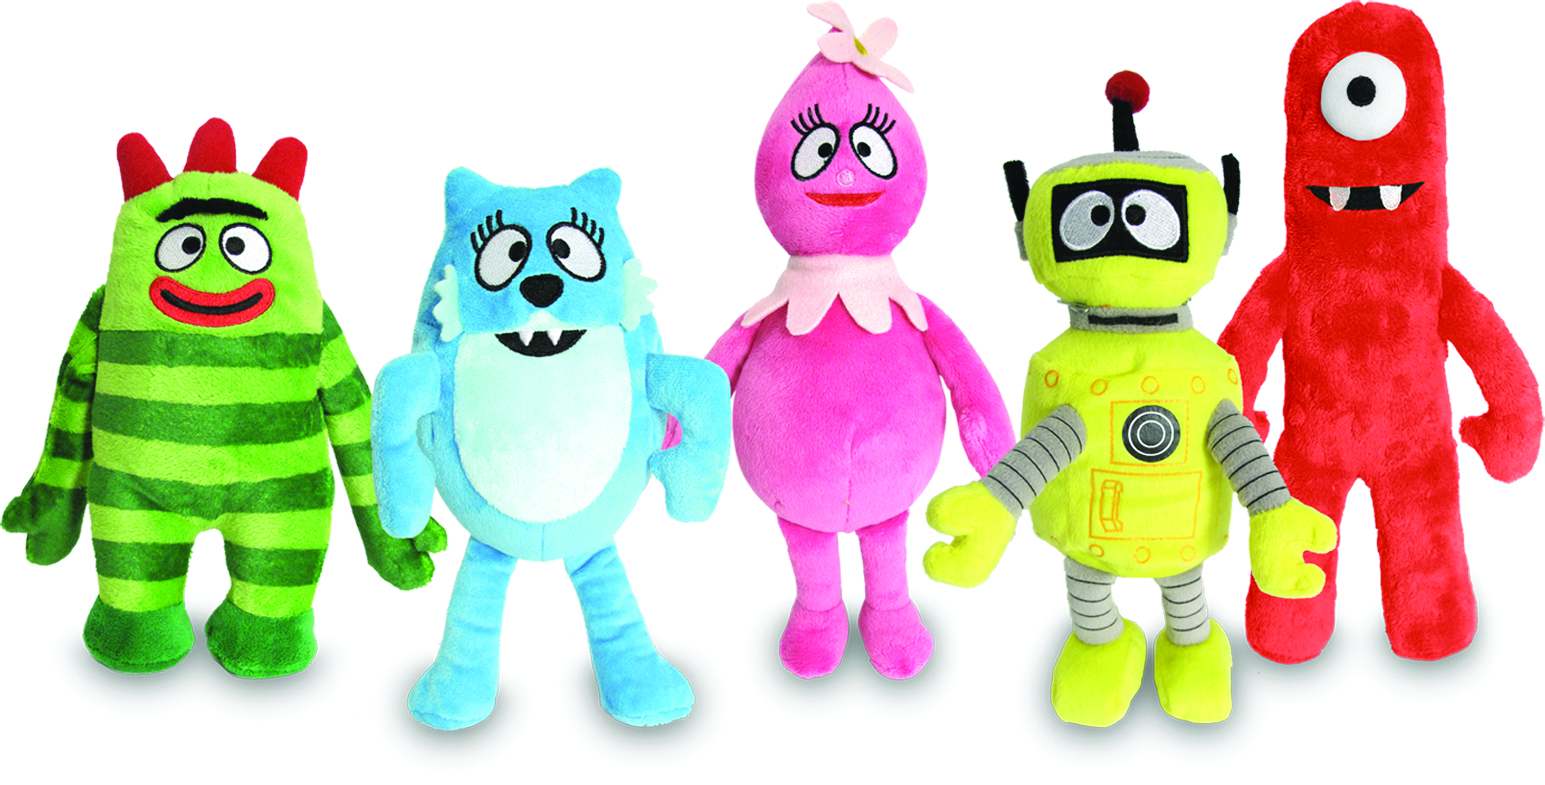 yo gabba gabba toys, yo gabba gabba toys Suppliers and